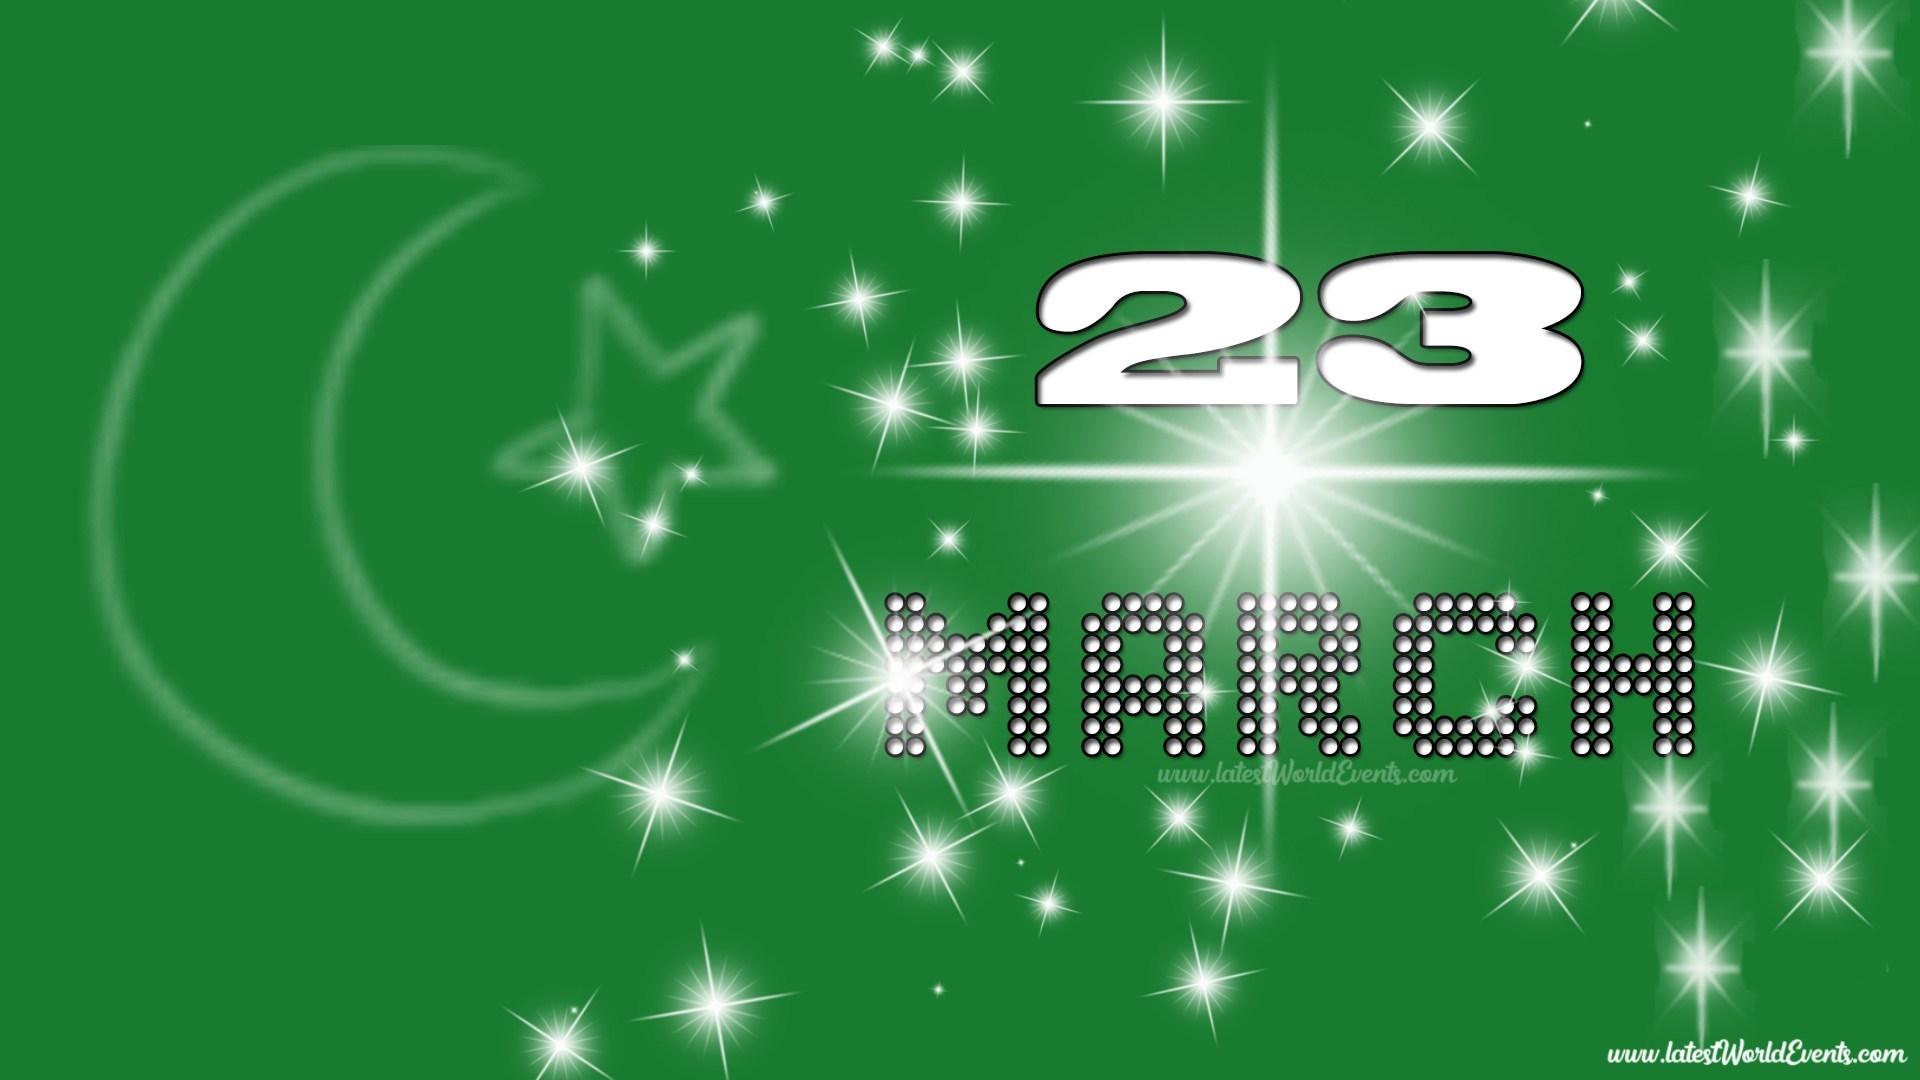 23rd March Resolution Day Wallpaper World Events